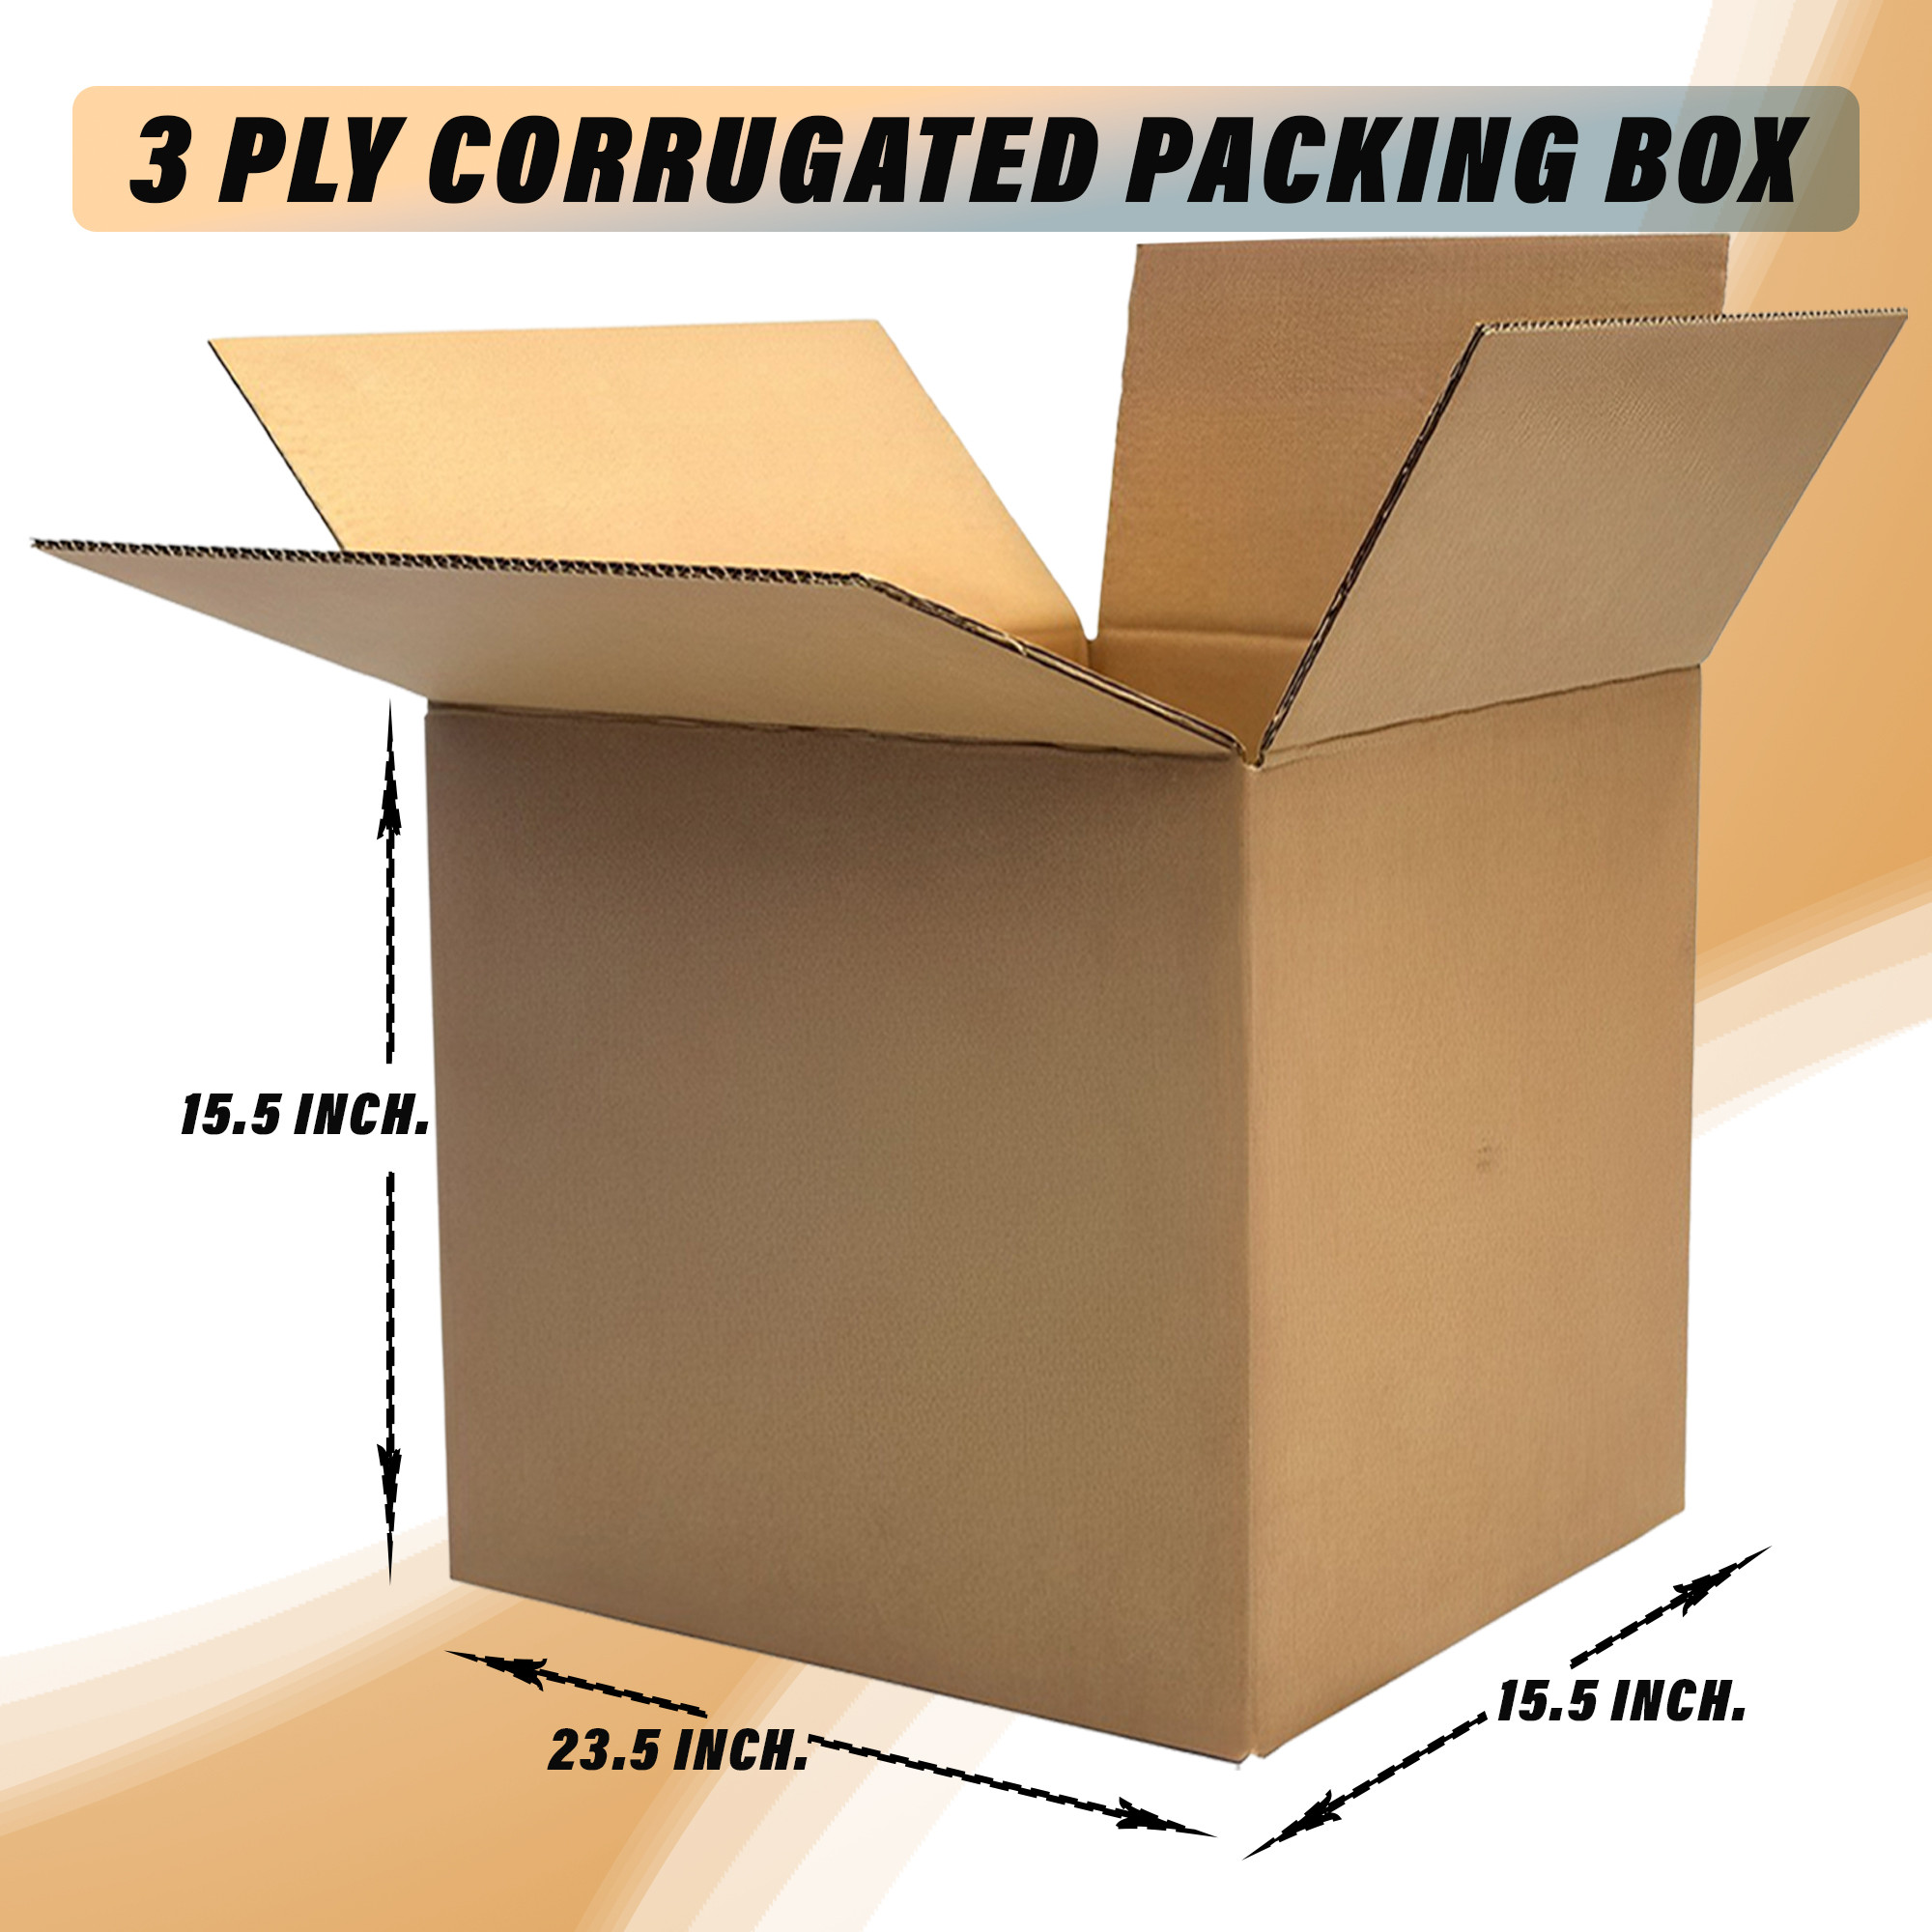 Kuber Industries Corrugated Box | 3 Ply Corrugated Packing Box | Corrugated for Shipping | Corrugated for Courier & Goods Transportation | L 23.5 x W 15.5 x H 15.5 Inch|Brown